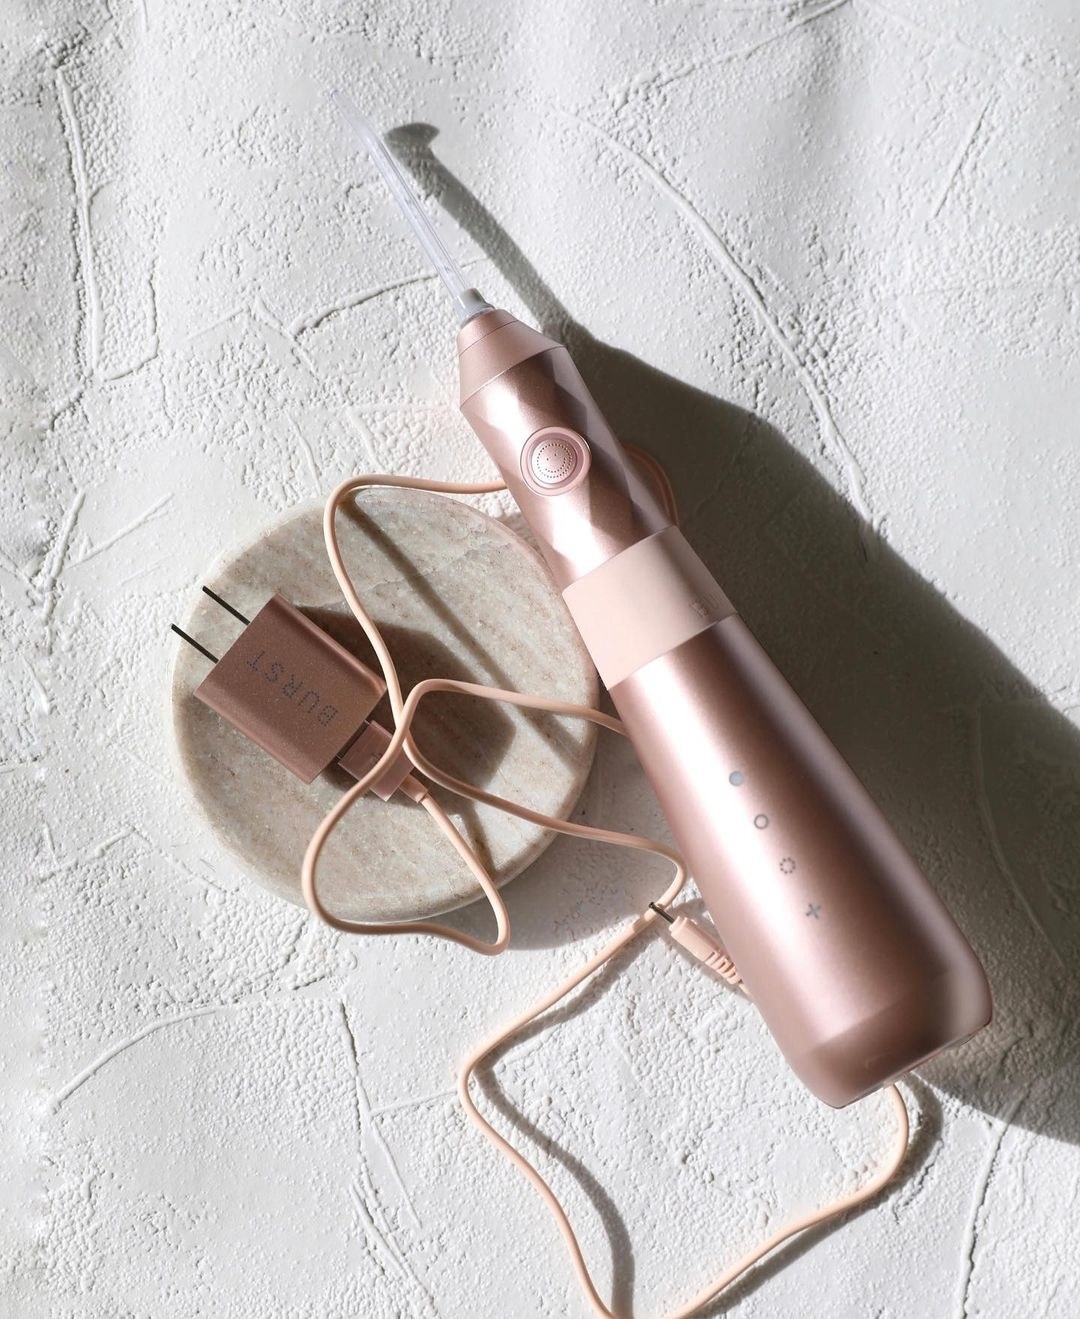 the rose gold water flosser